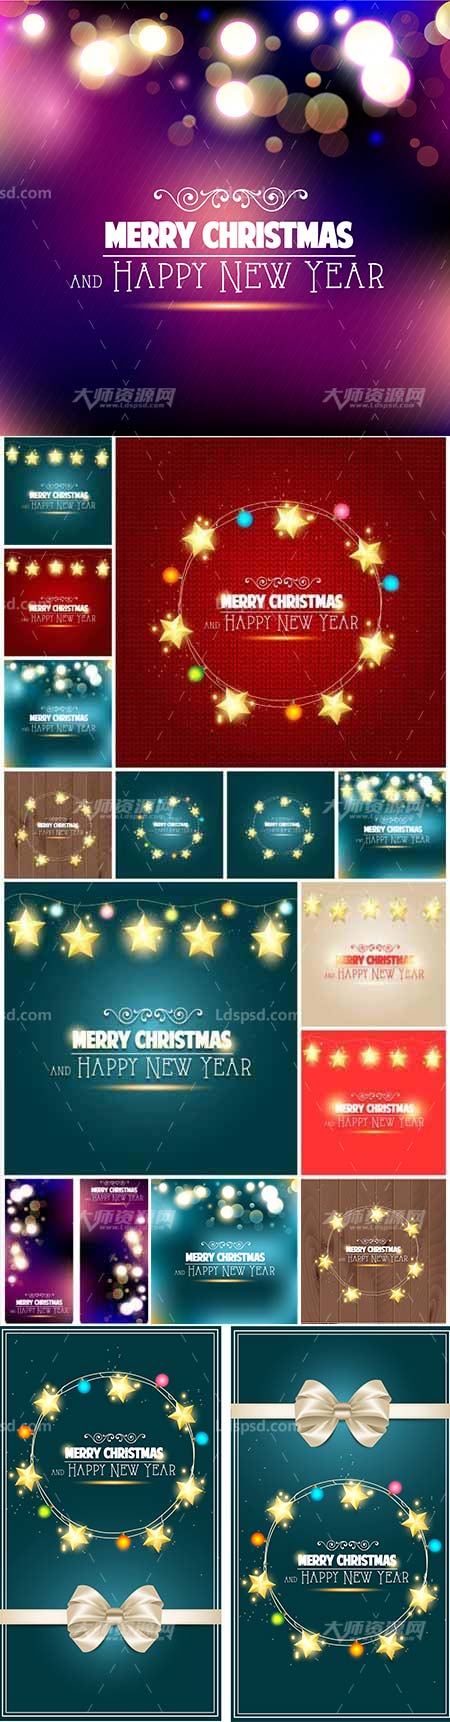 Christmas vector backgrounds with bright stars,15个矢量的圣诞节星星素材